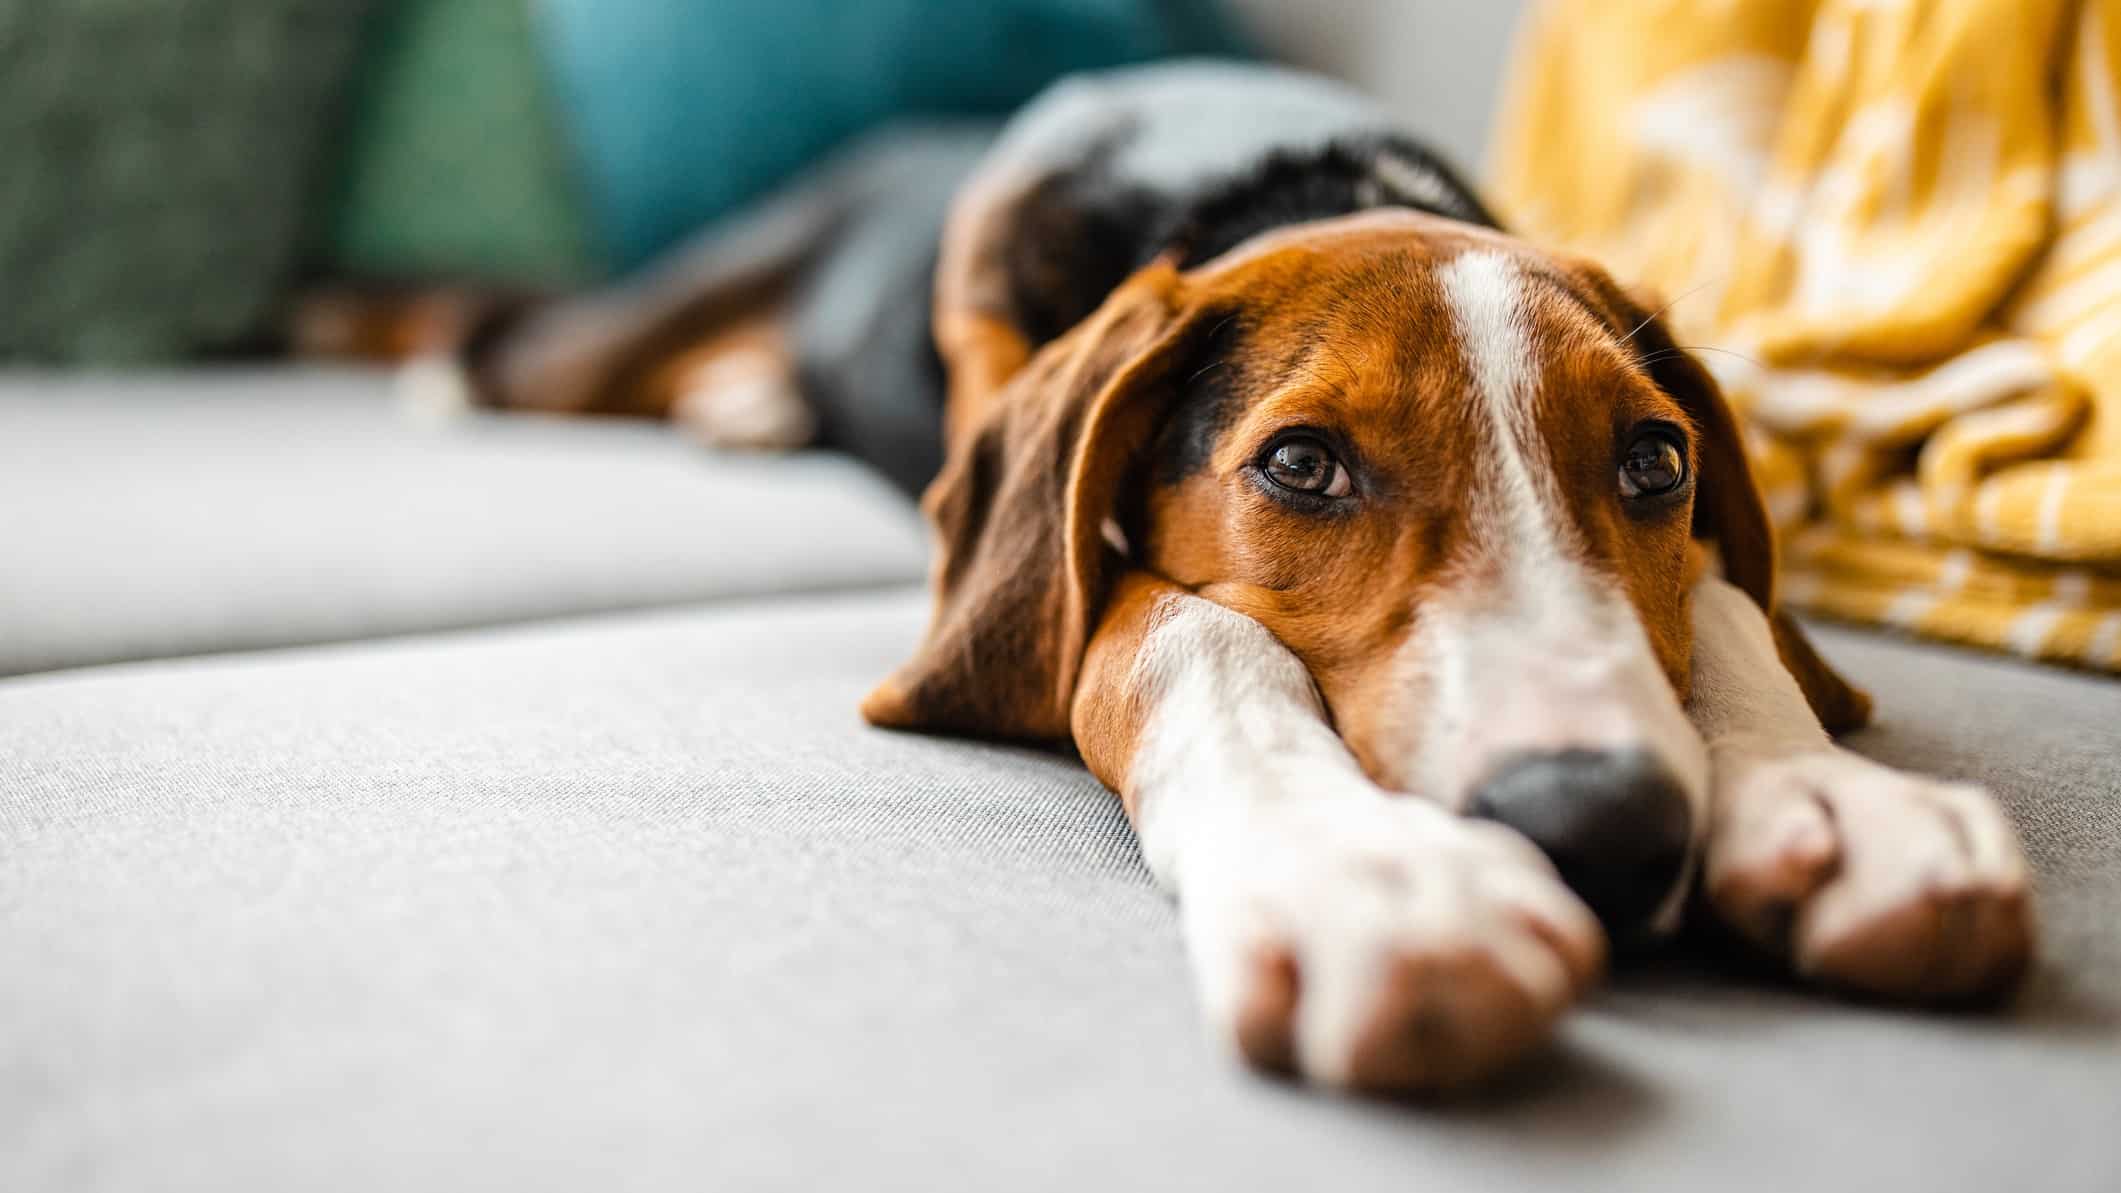 A very sad beagle cross dog lays dejectedly on a sofa with his short legs stretched out in front of him in a pose of flat defeat as he stares sadly at the camera.